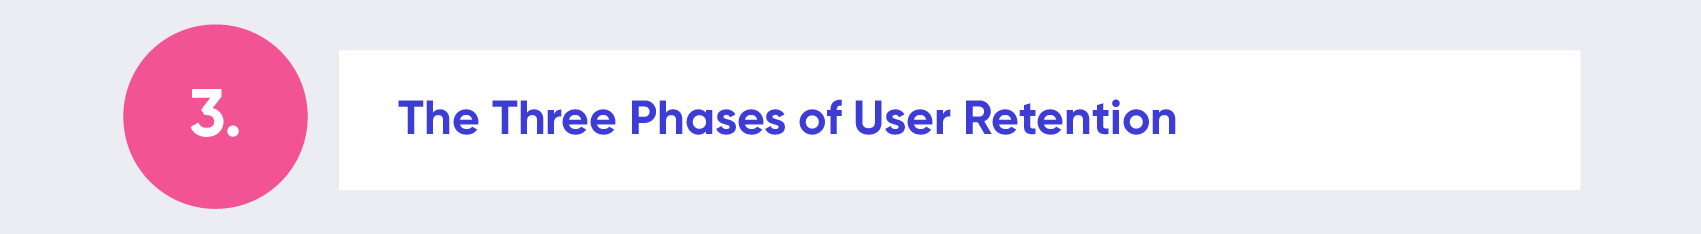 Three Phases of User Retention